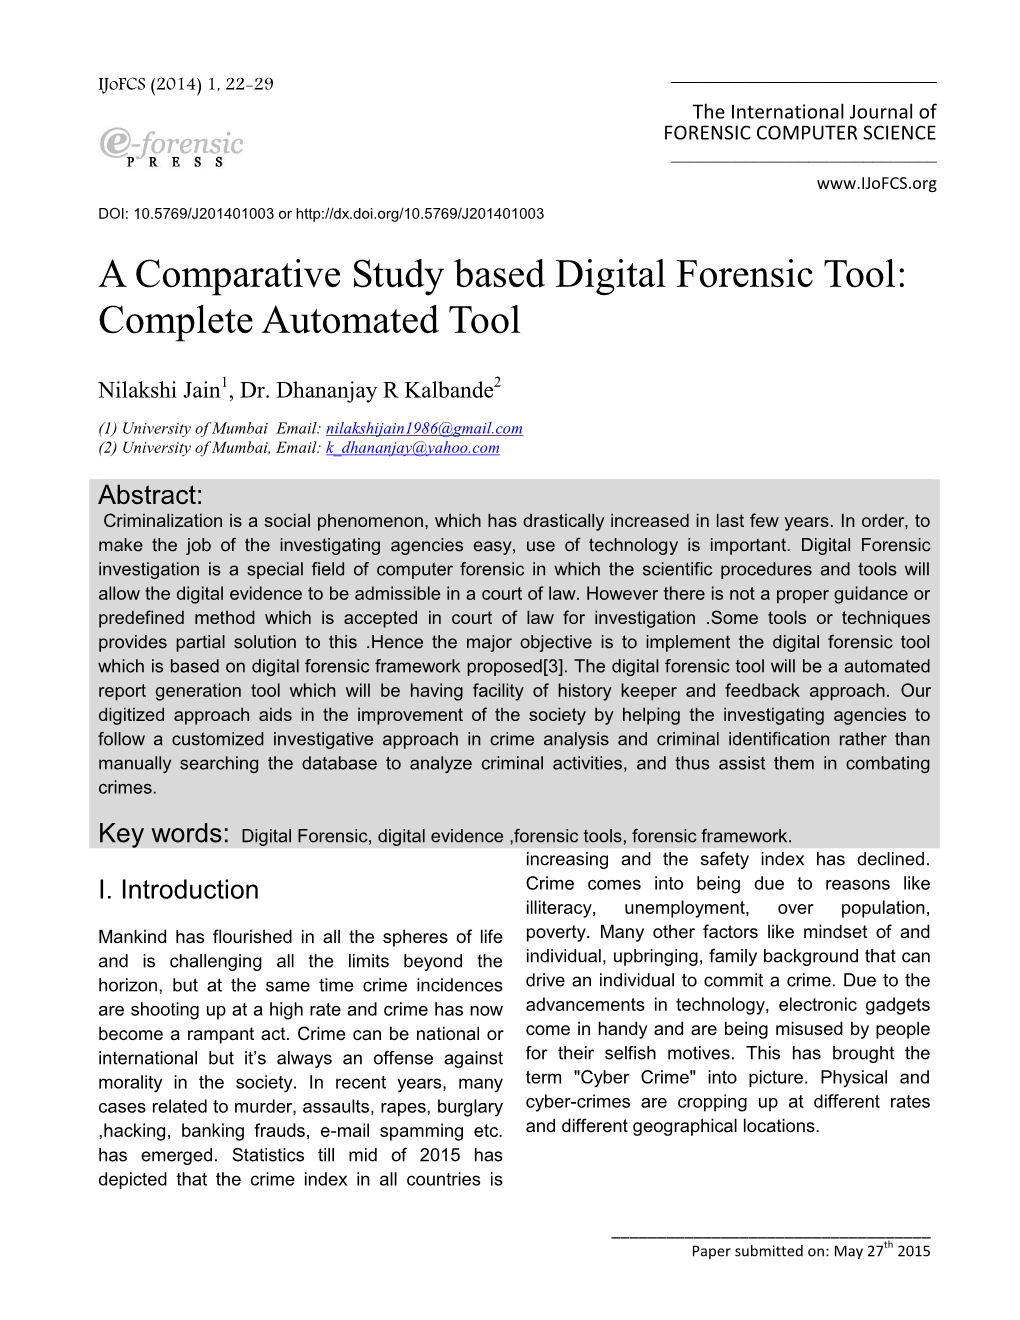 A Comparative Study Based Digital Forensic Tool: Complete Automated Tool